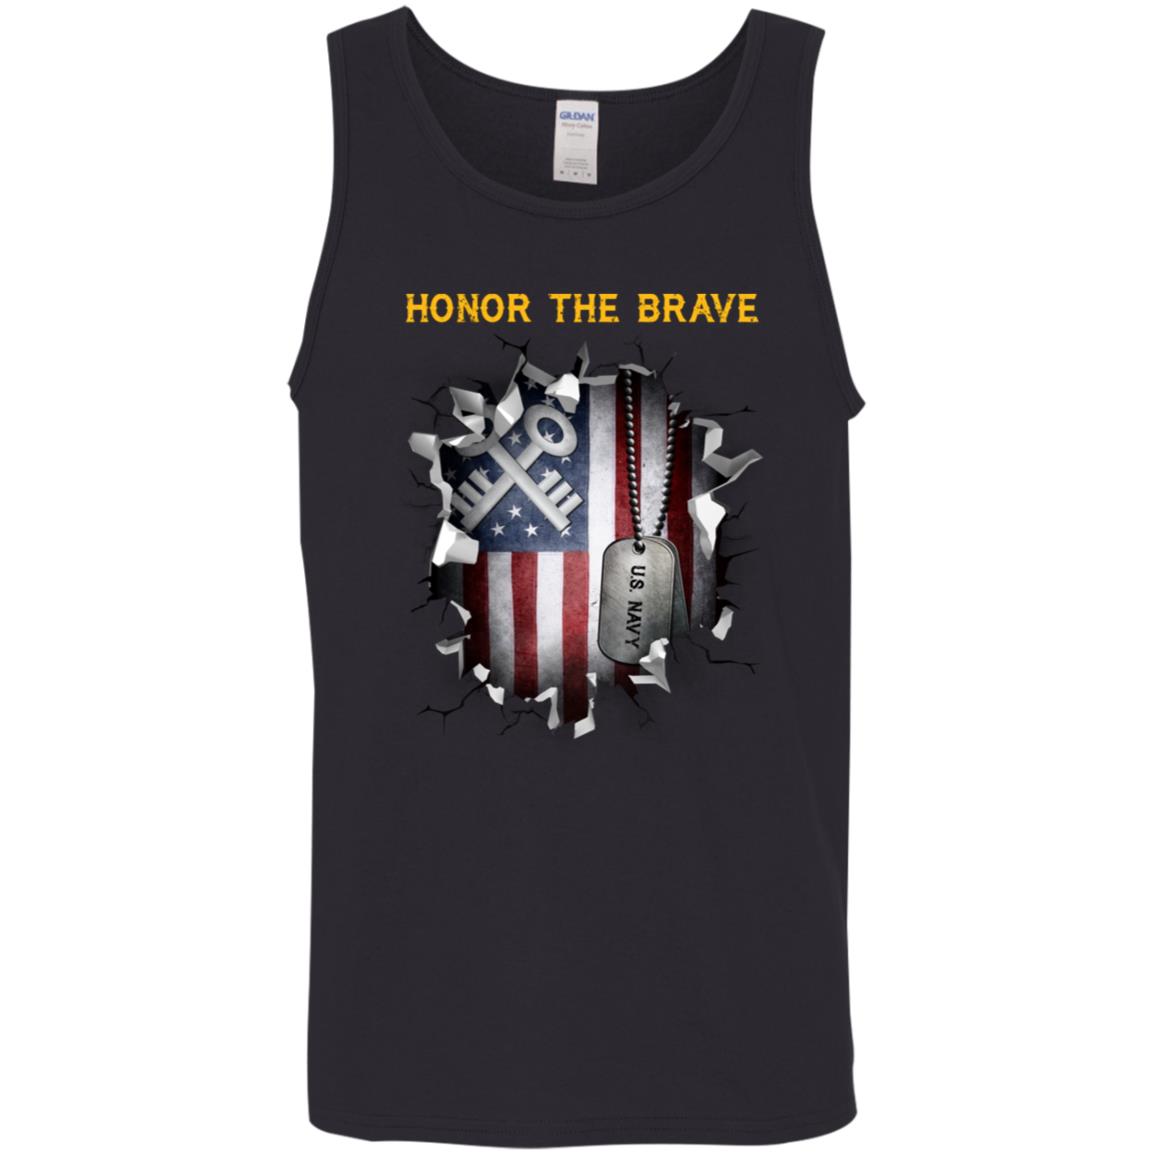 U.S Navy Logistics specialist Navy LS - Honor The Brave Front Shirt